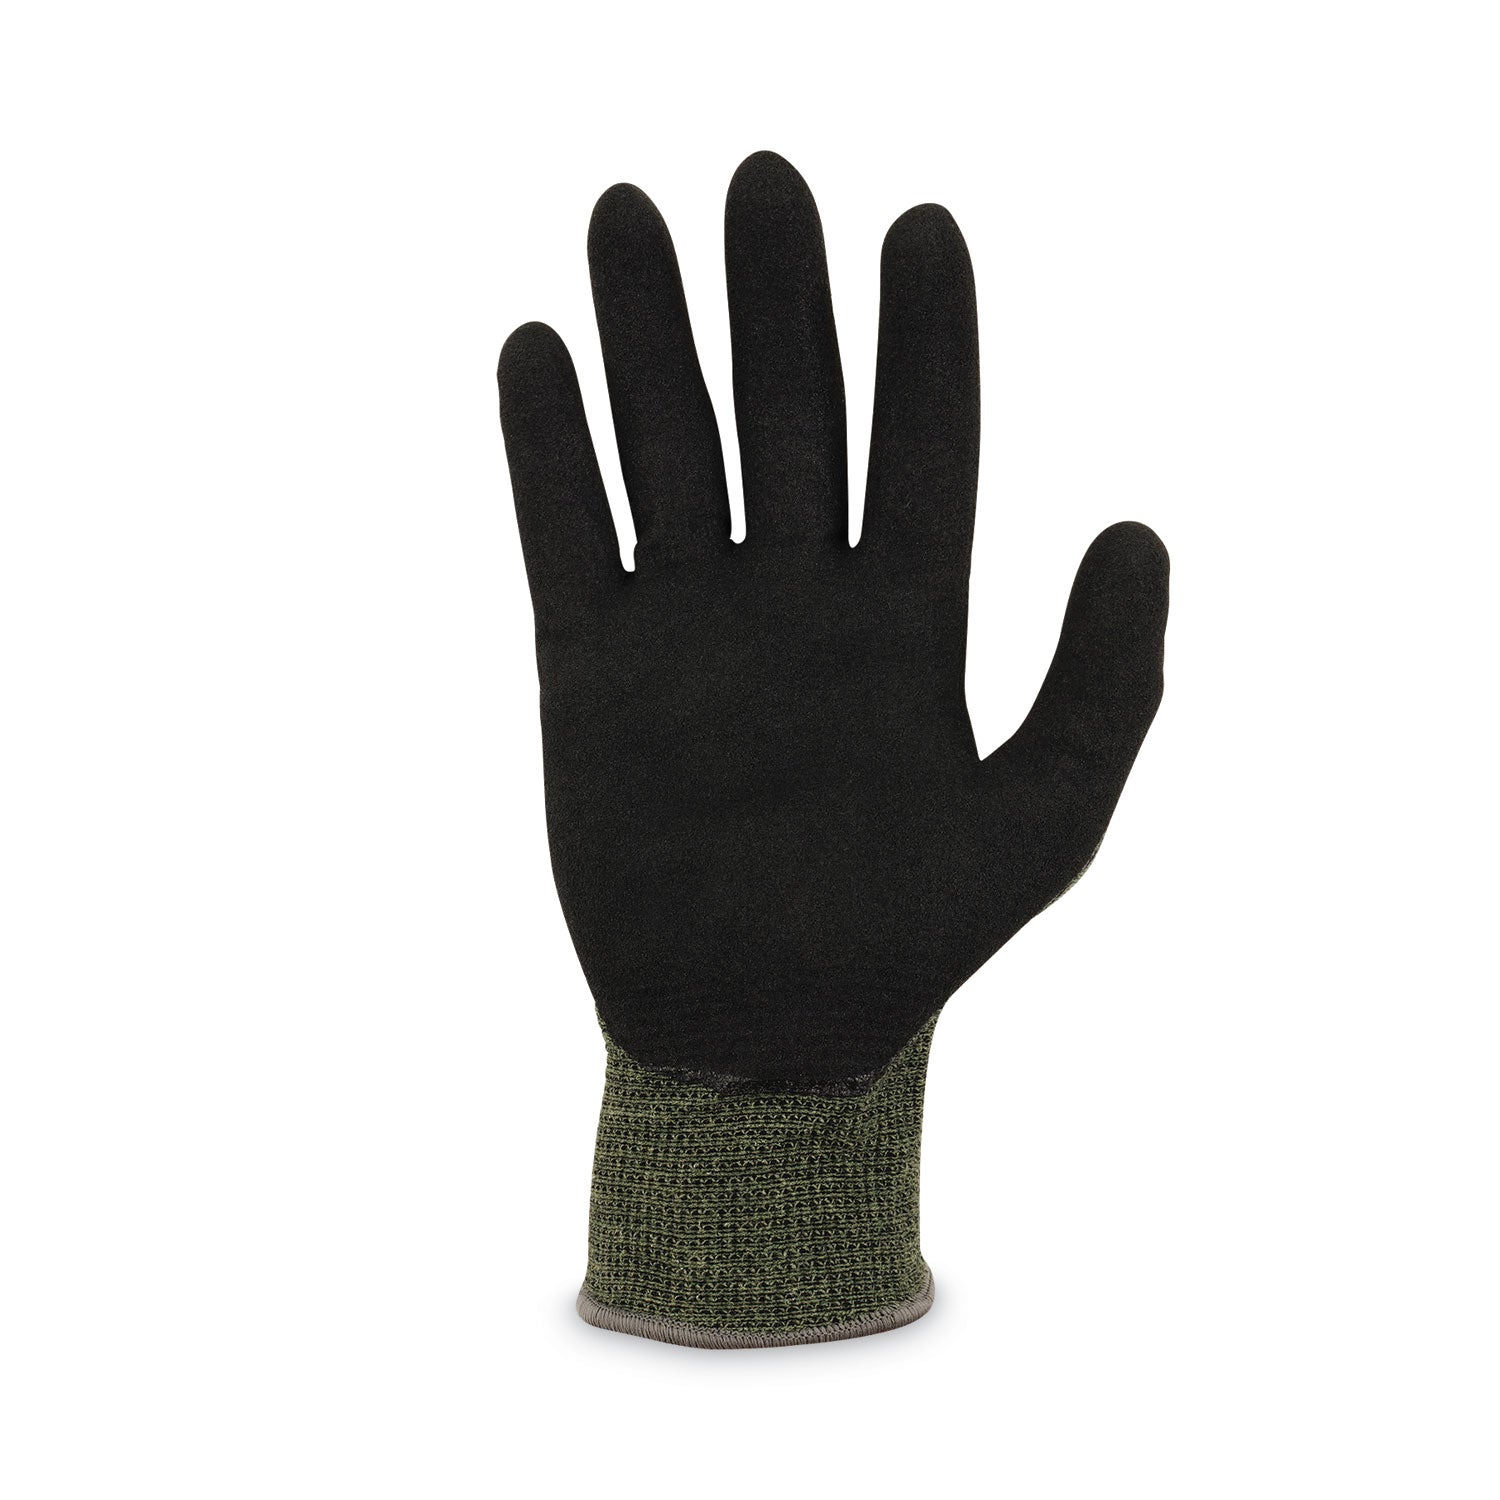 proflex-7042-ansi-a4-nitrile-coated-cr-gloves-green-x-large-pair-ships-in-1-3-business-days_ego10345 - 6